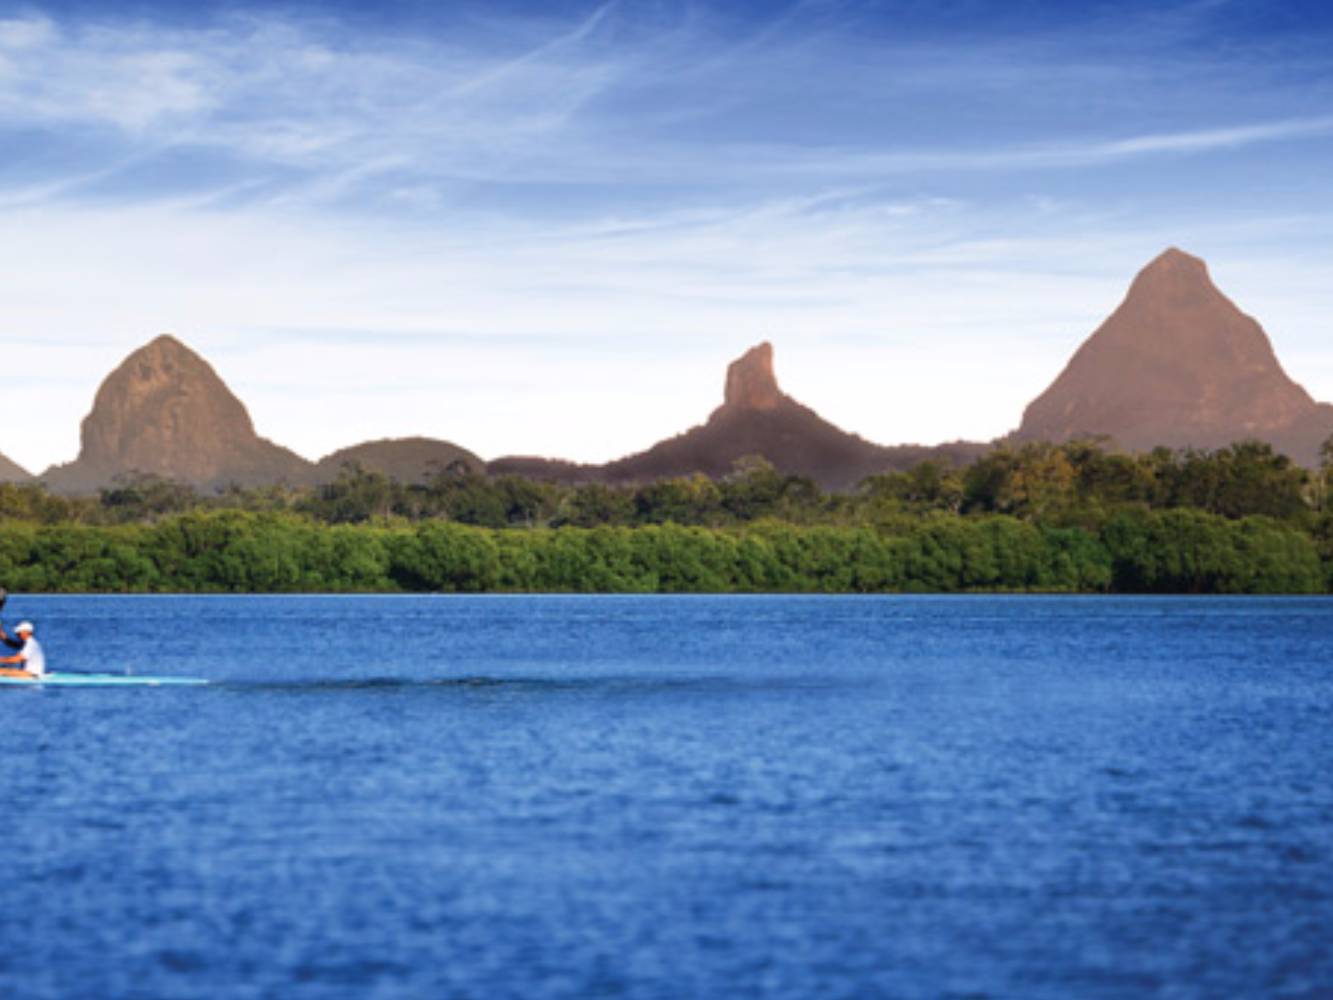 The nearby Glasshouse Mountains